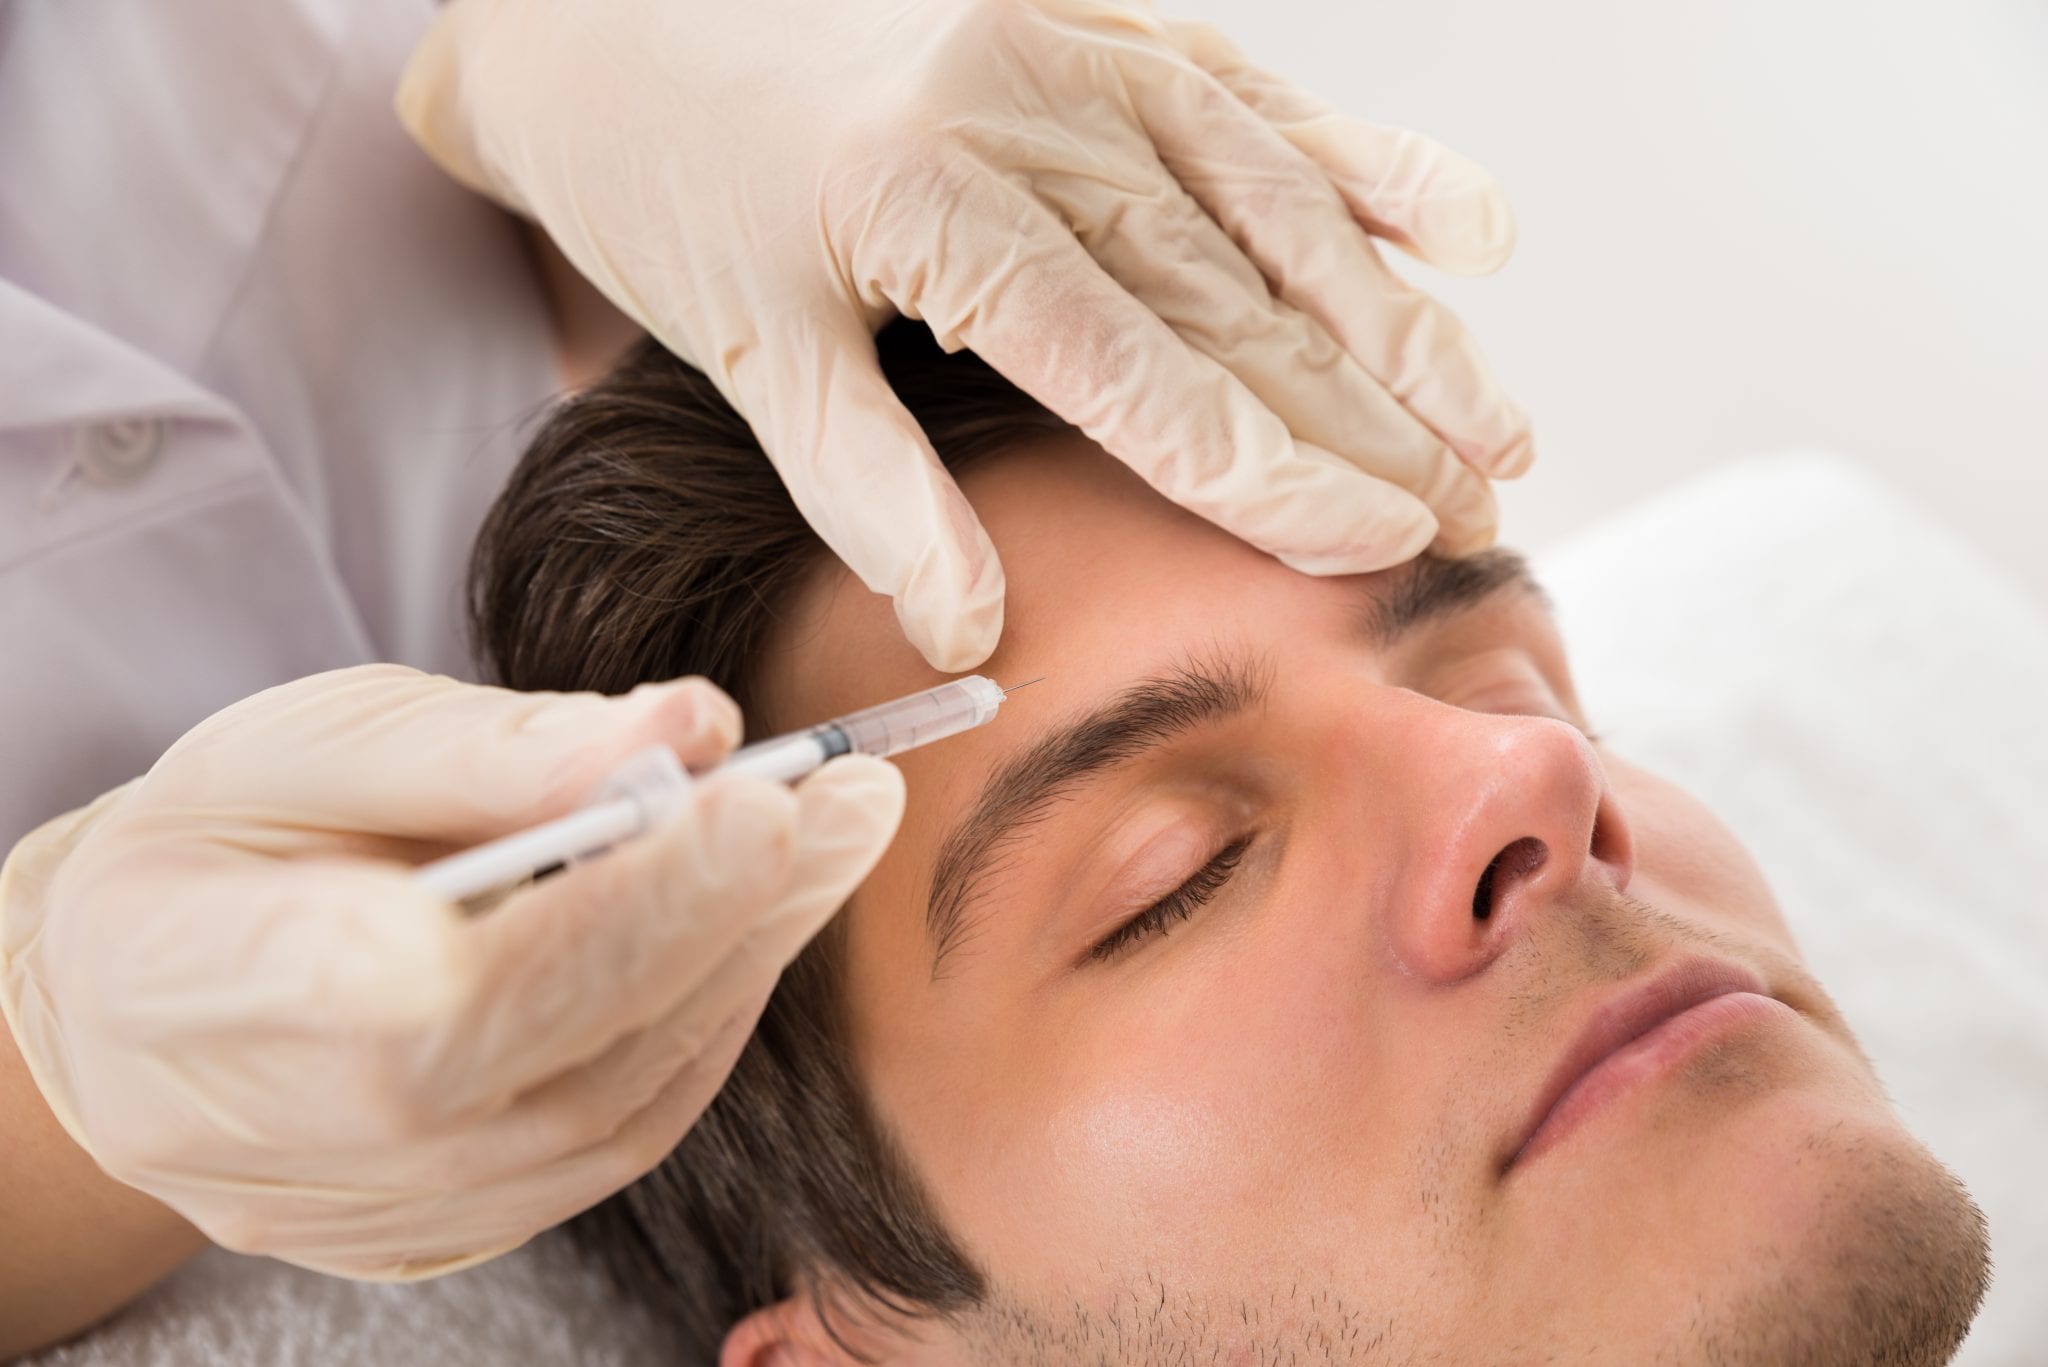 What Are the Best Non-Surgical Treatments for Men?